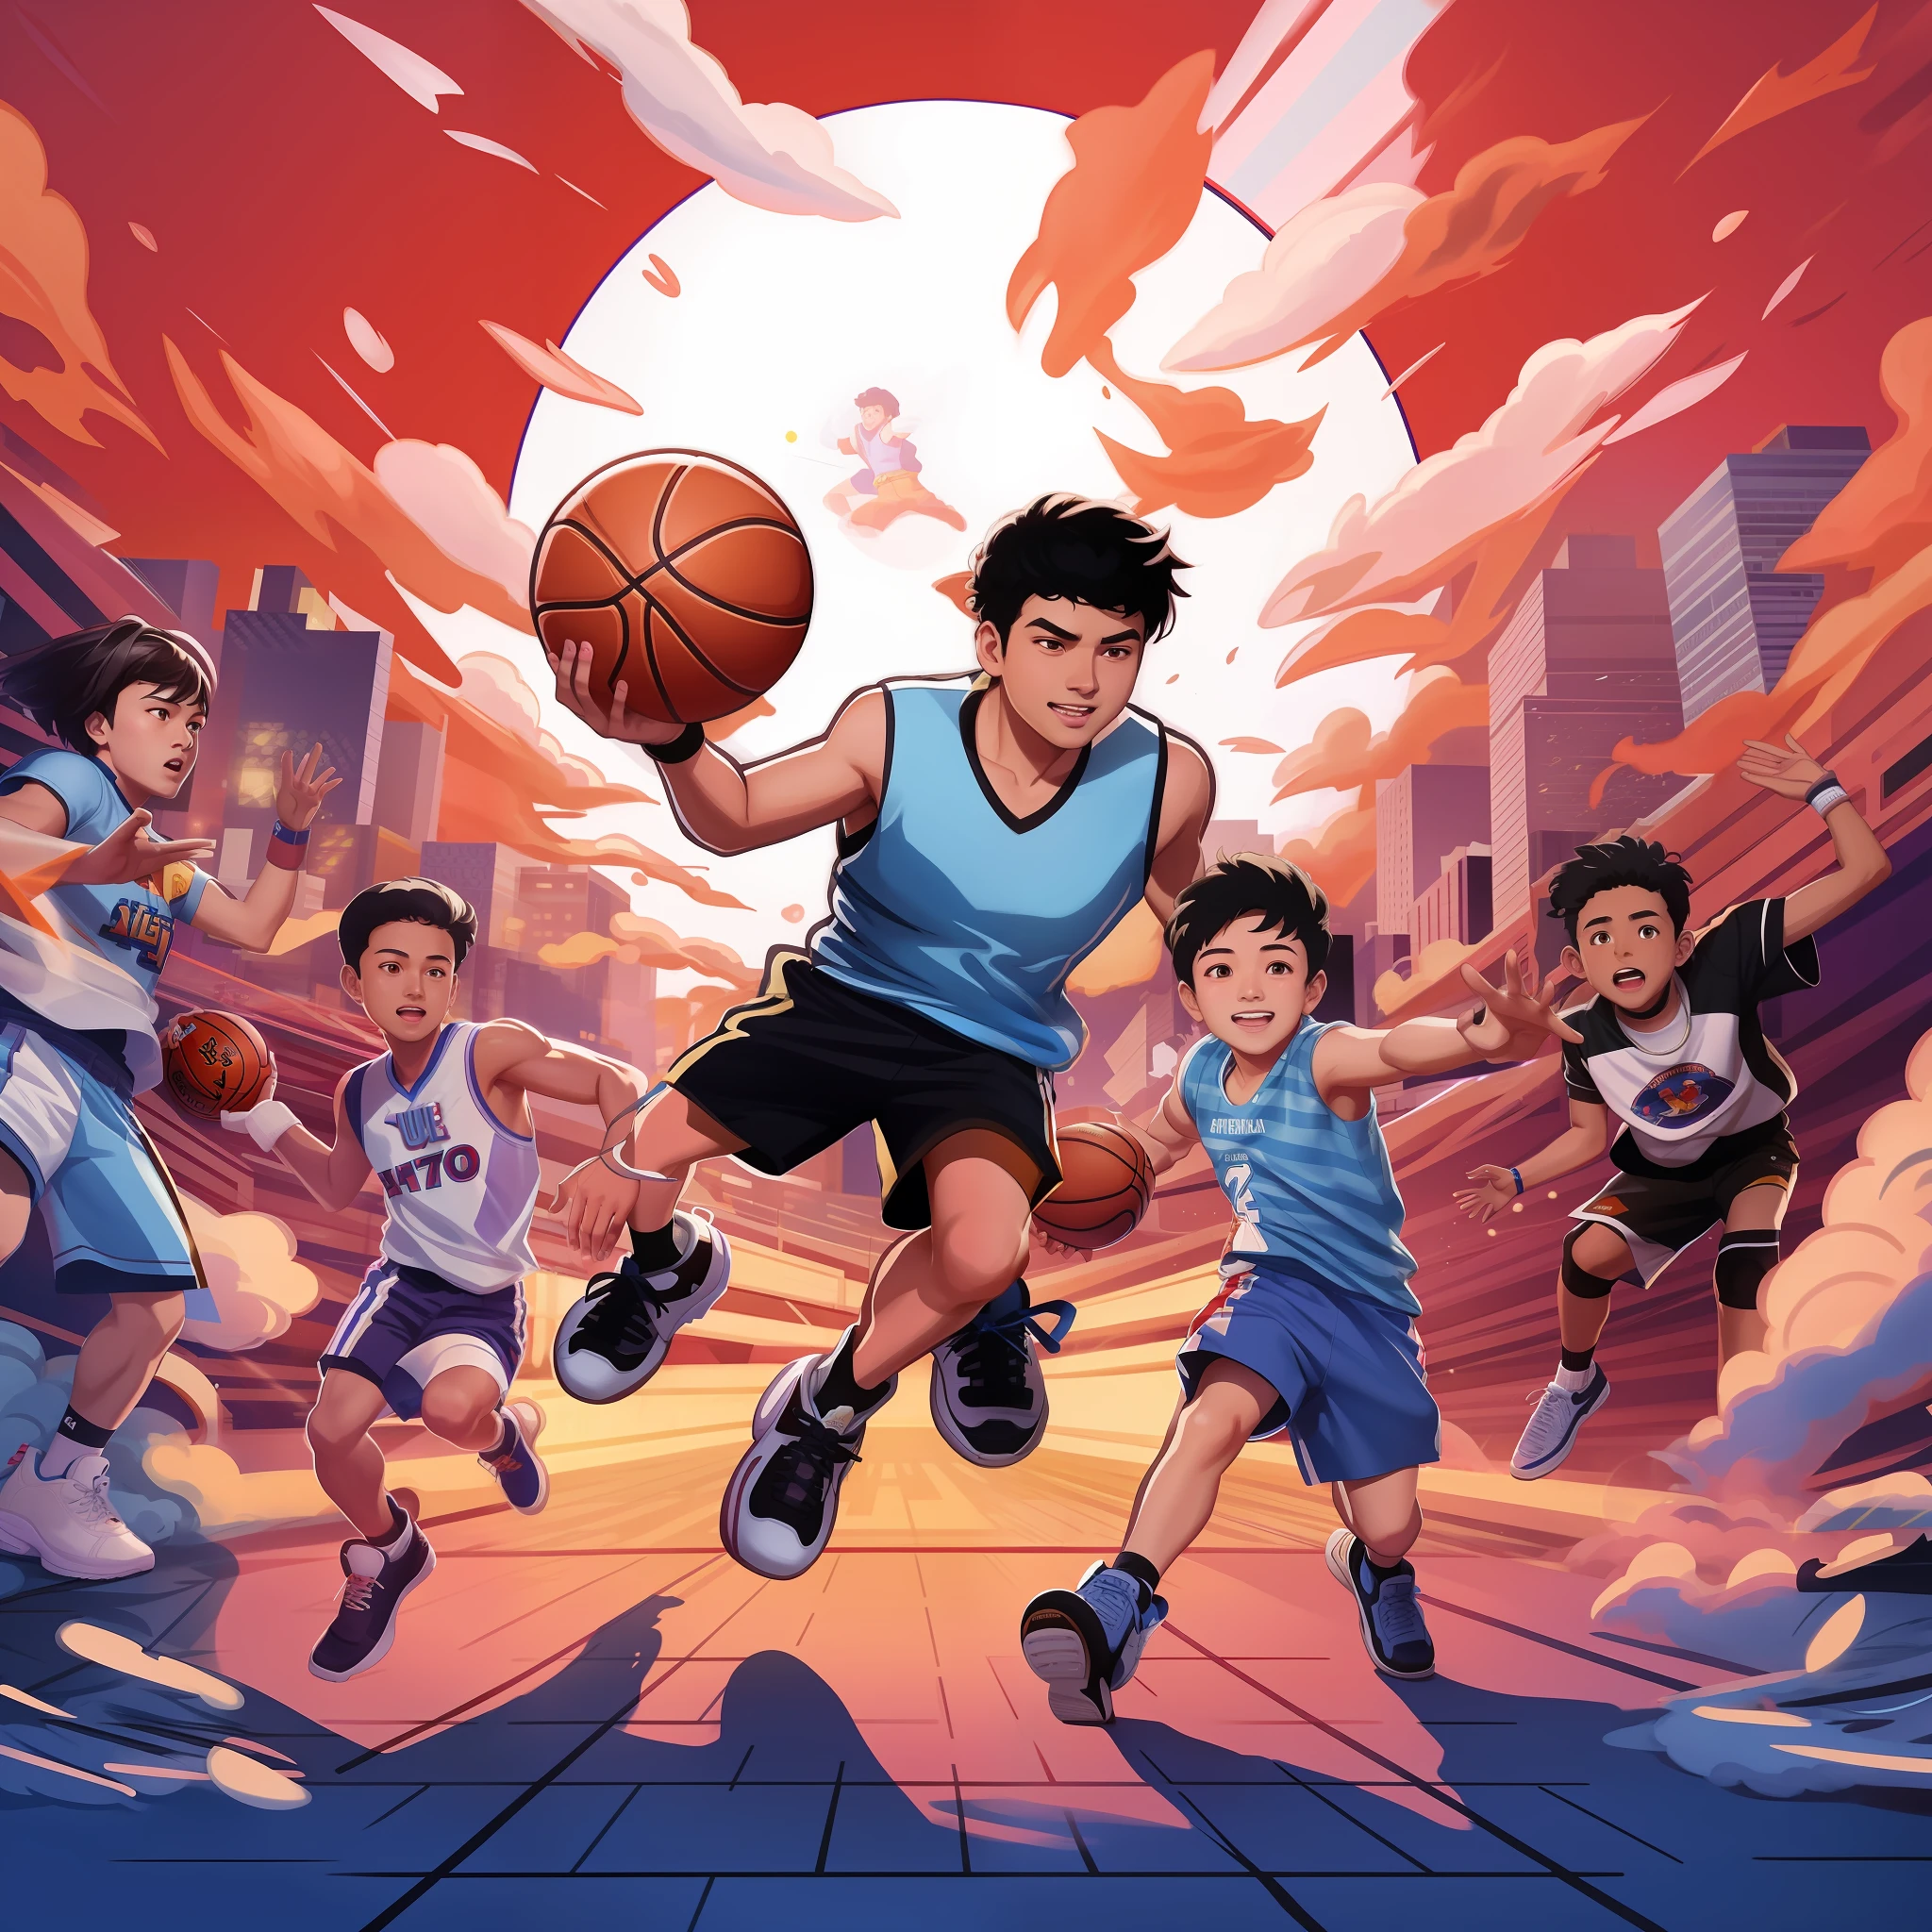 Cartoon illustration of a group of young people playing basketball in the city, in the style of sachin teng, author：Eddie Mendoza, jc leyendecker and sachin teng, Game illustration, Official artwork, author：Patrick Cheng, author：Ryan Yee, scence of slam dunk, offcial art, official fanart, dribble contest winner, full-colour illustration, Sachin Teng, author：Chen Jiesheng